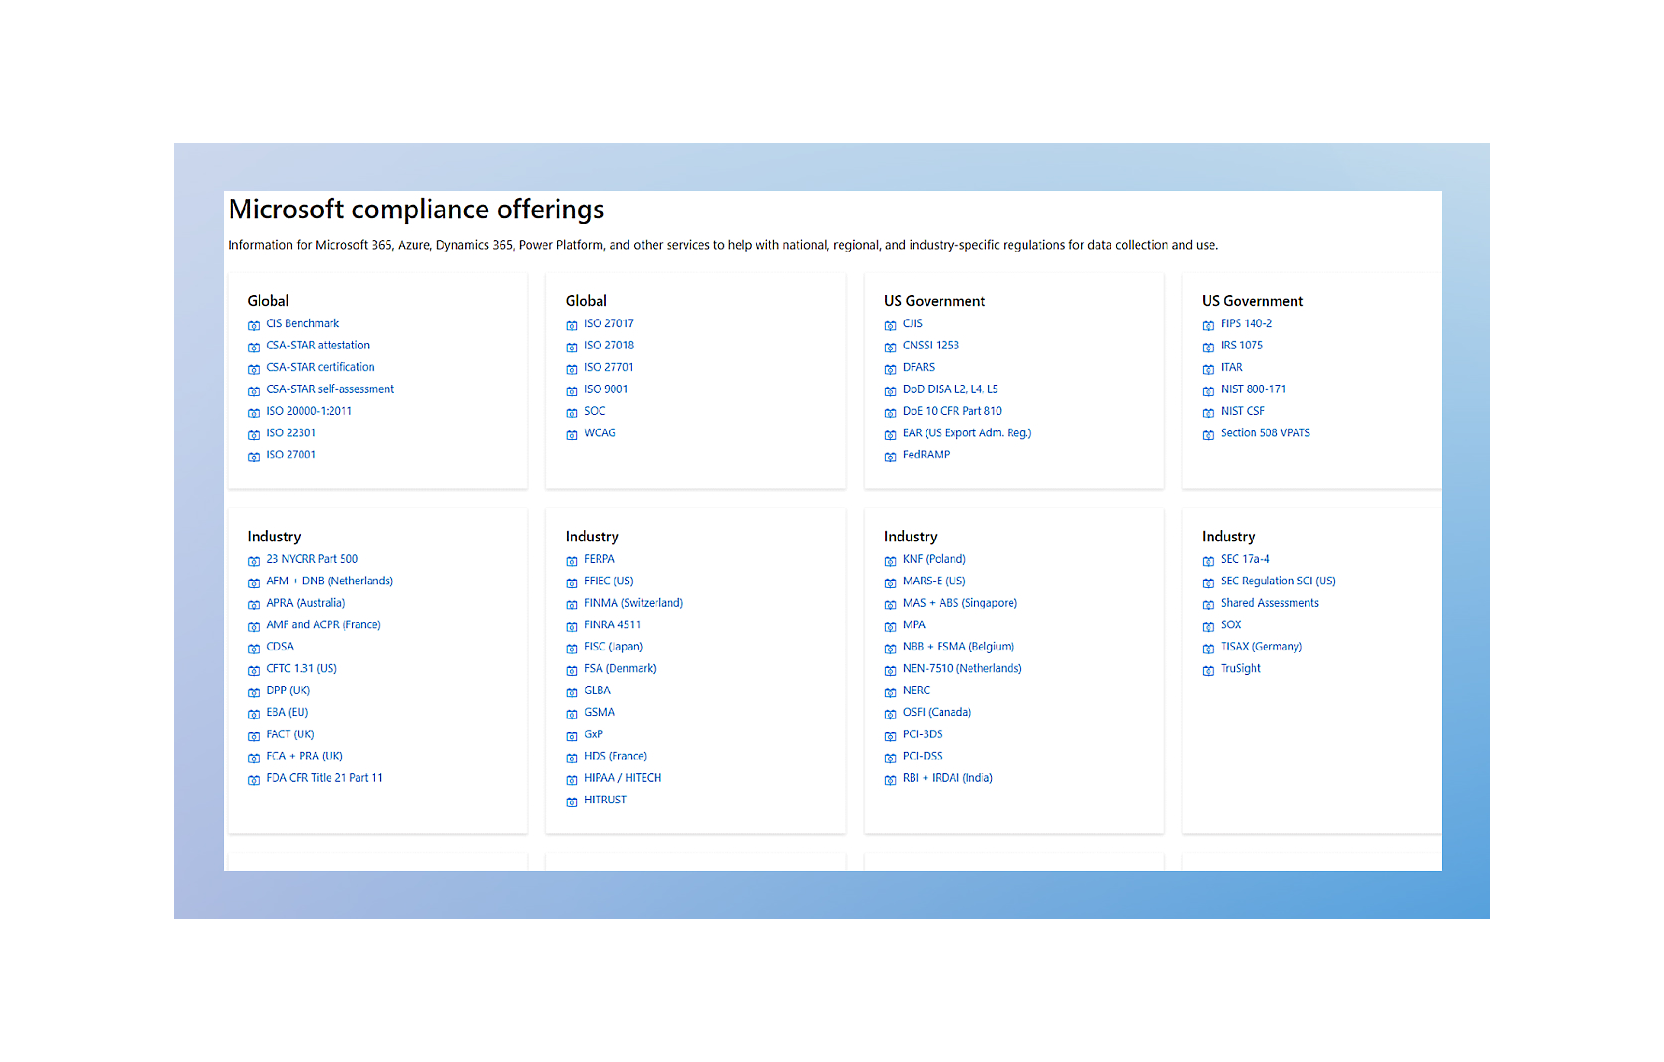 A screen shot of a screen showing Microsoft's various compliance offerings